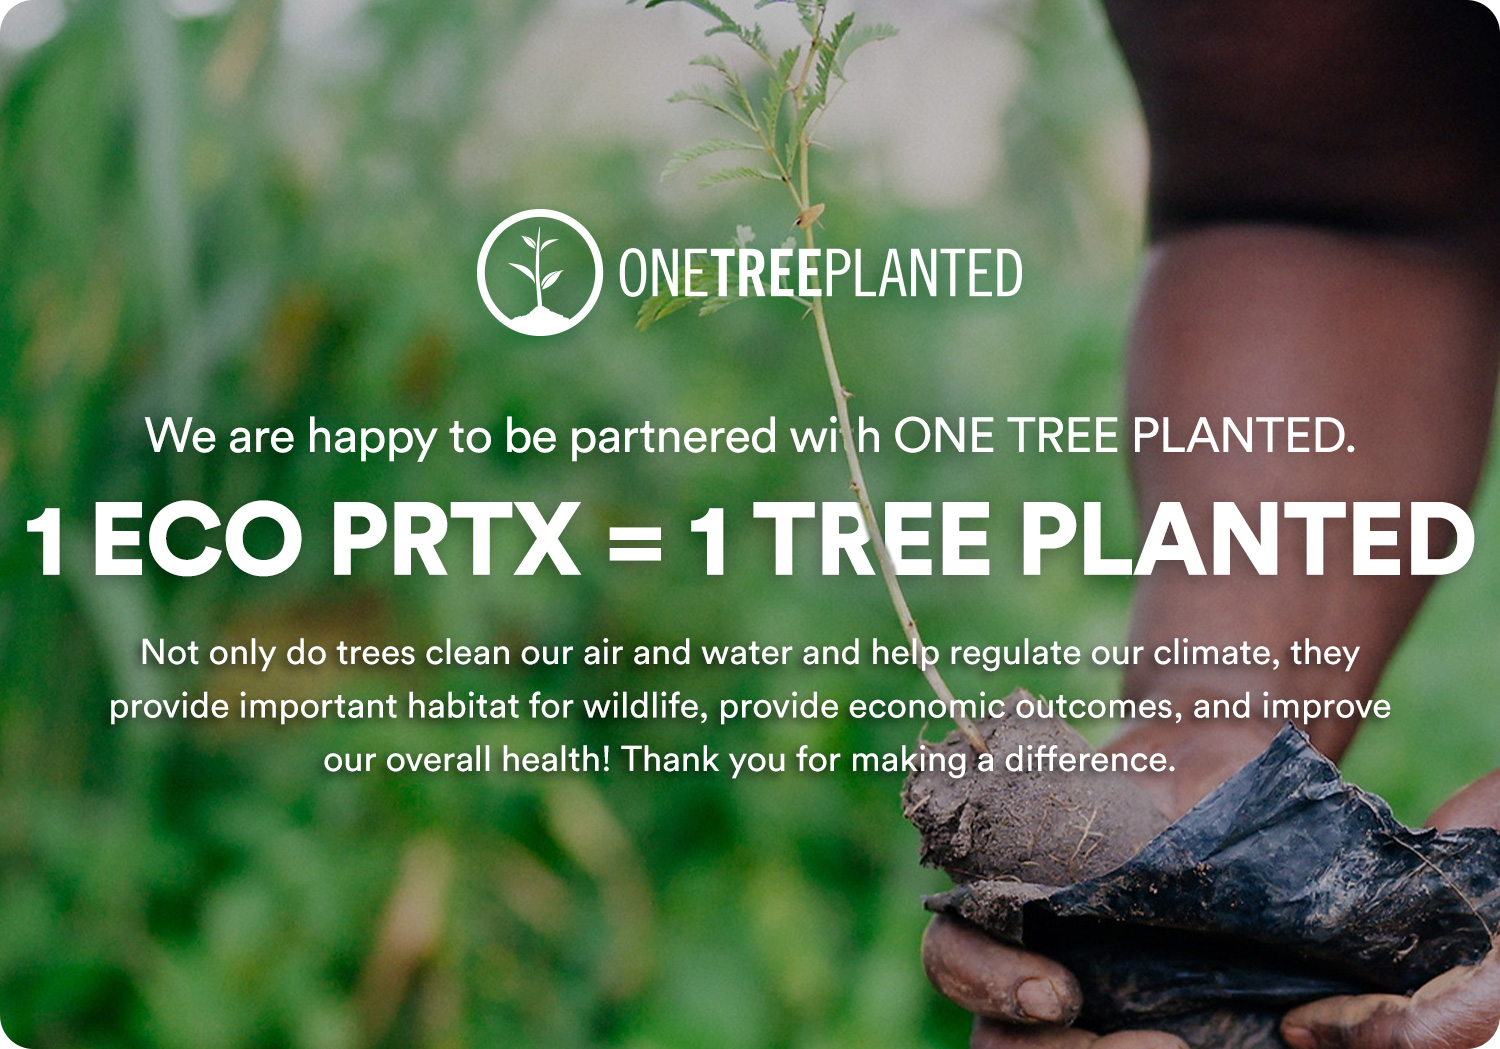 One ECO PRTX purchased = One Tree Planted